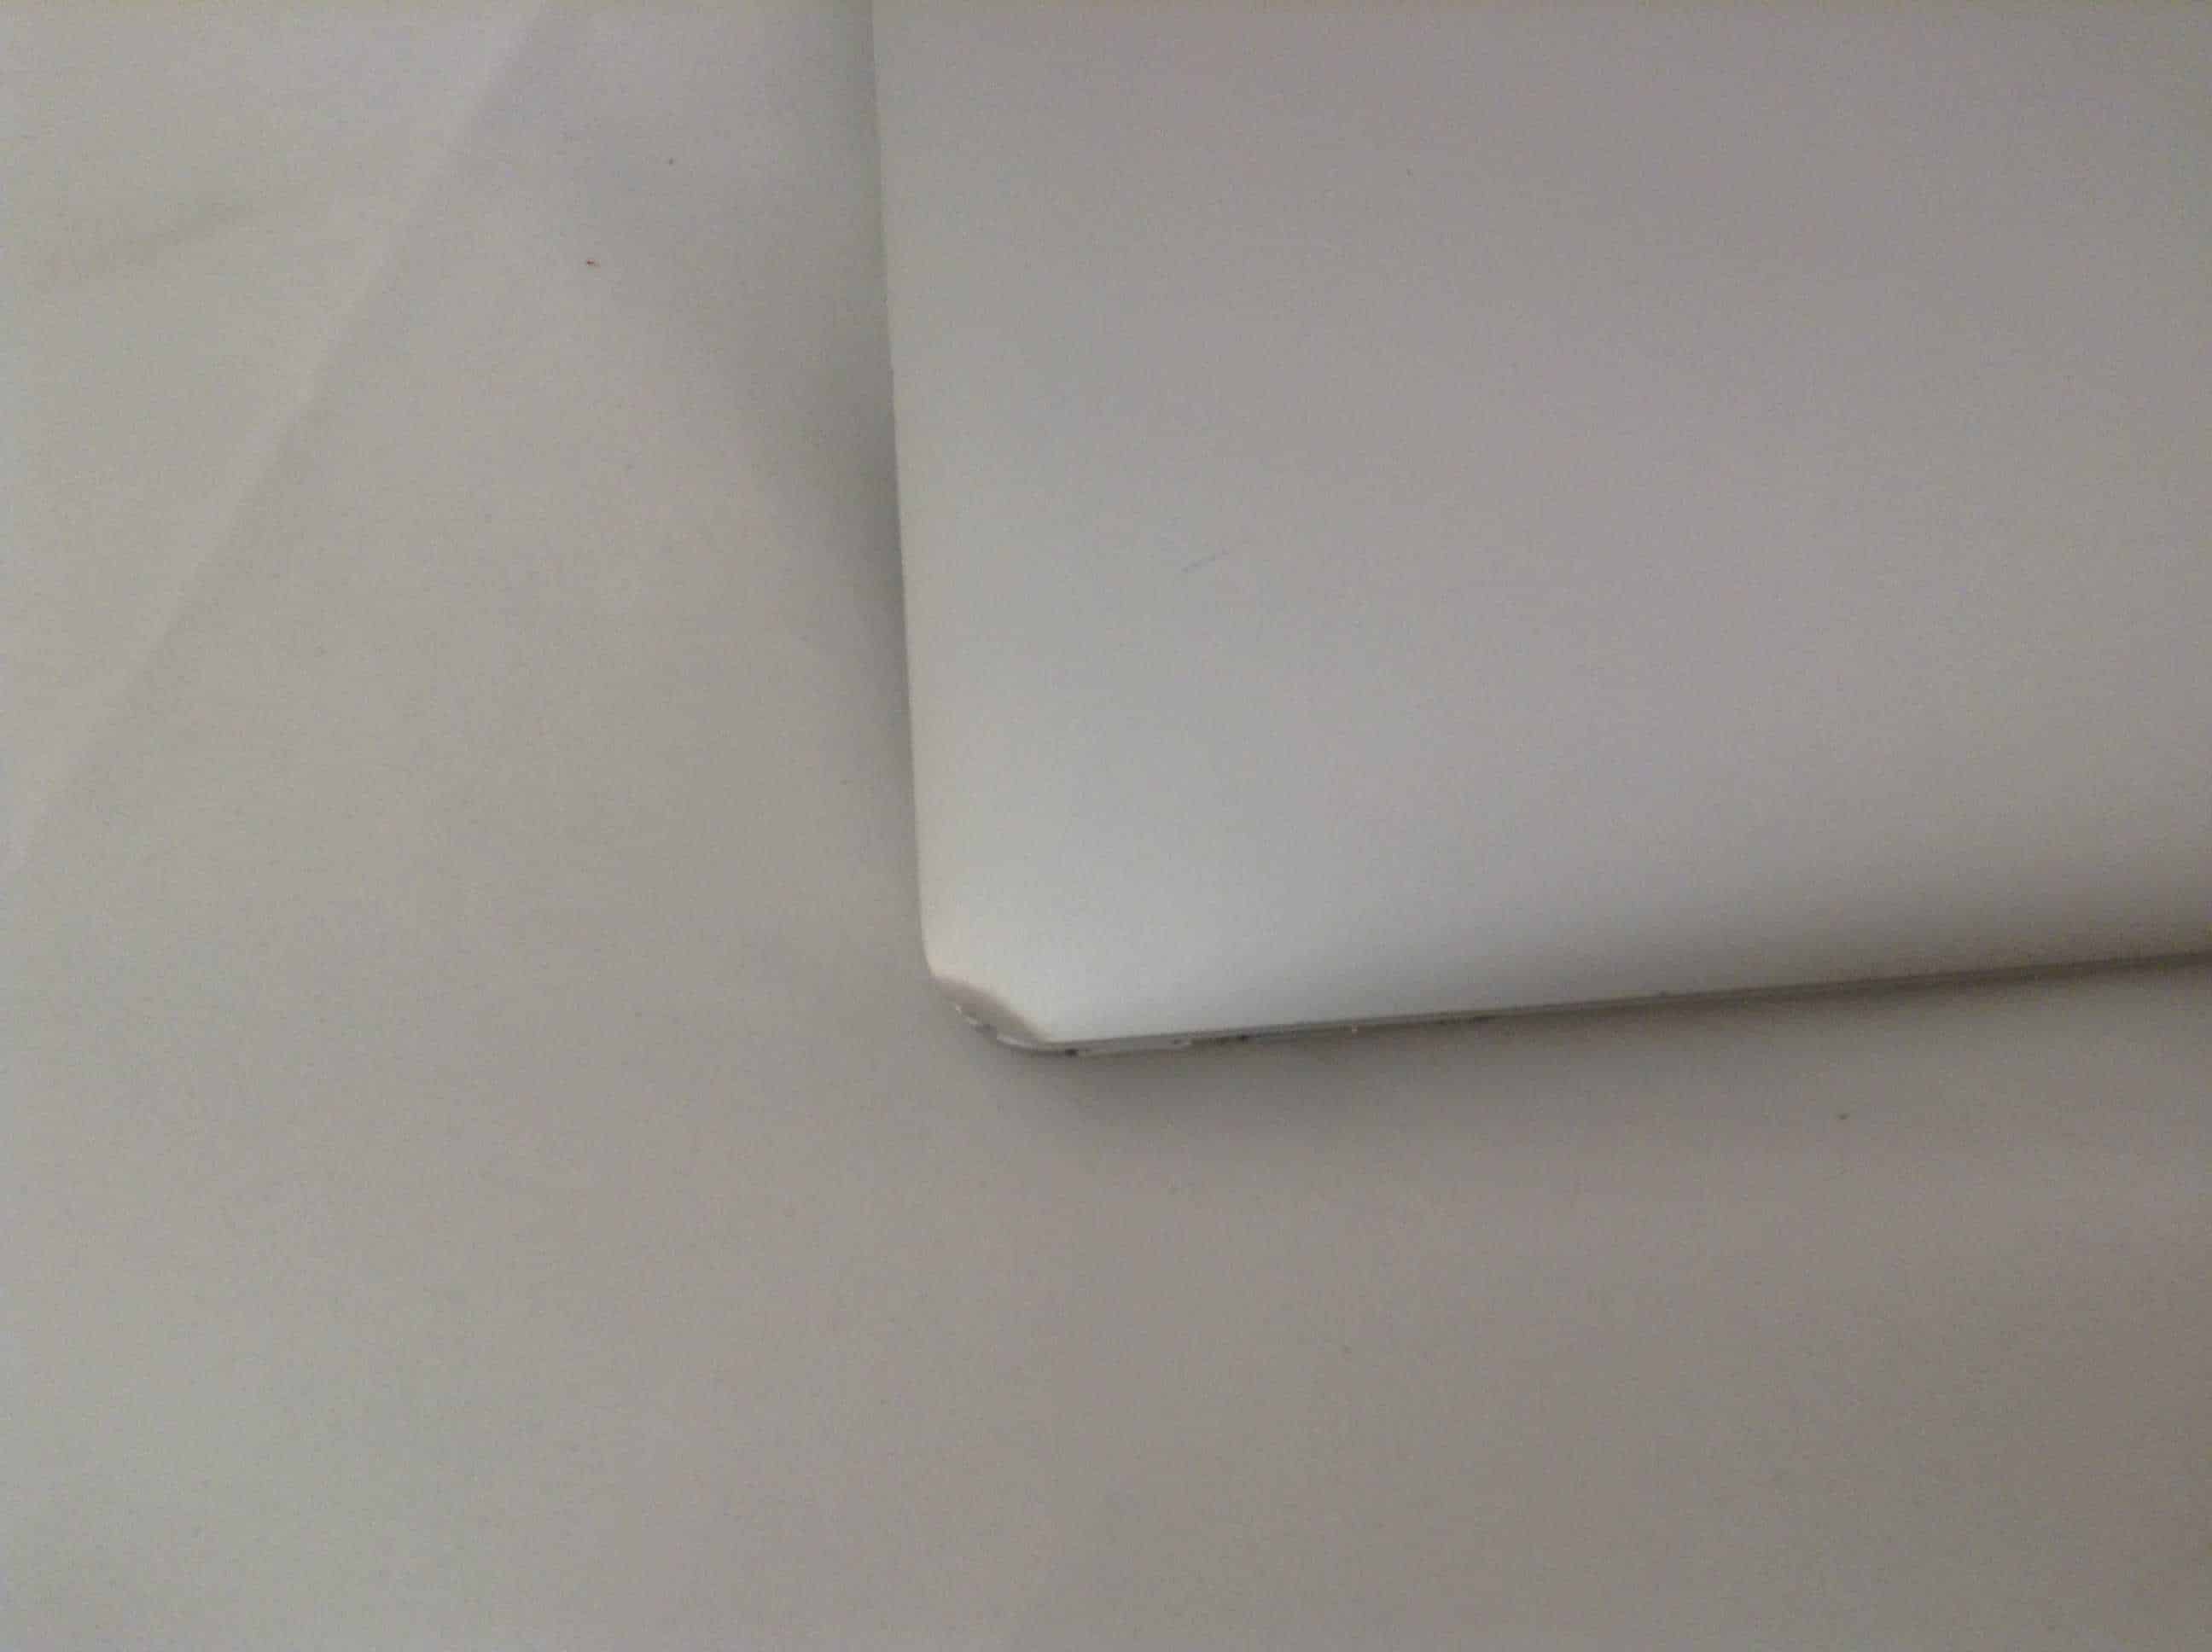 MacBook Air with dent on Corner